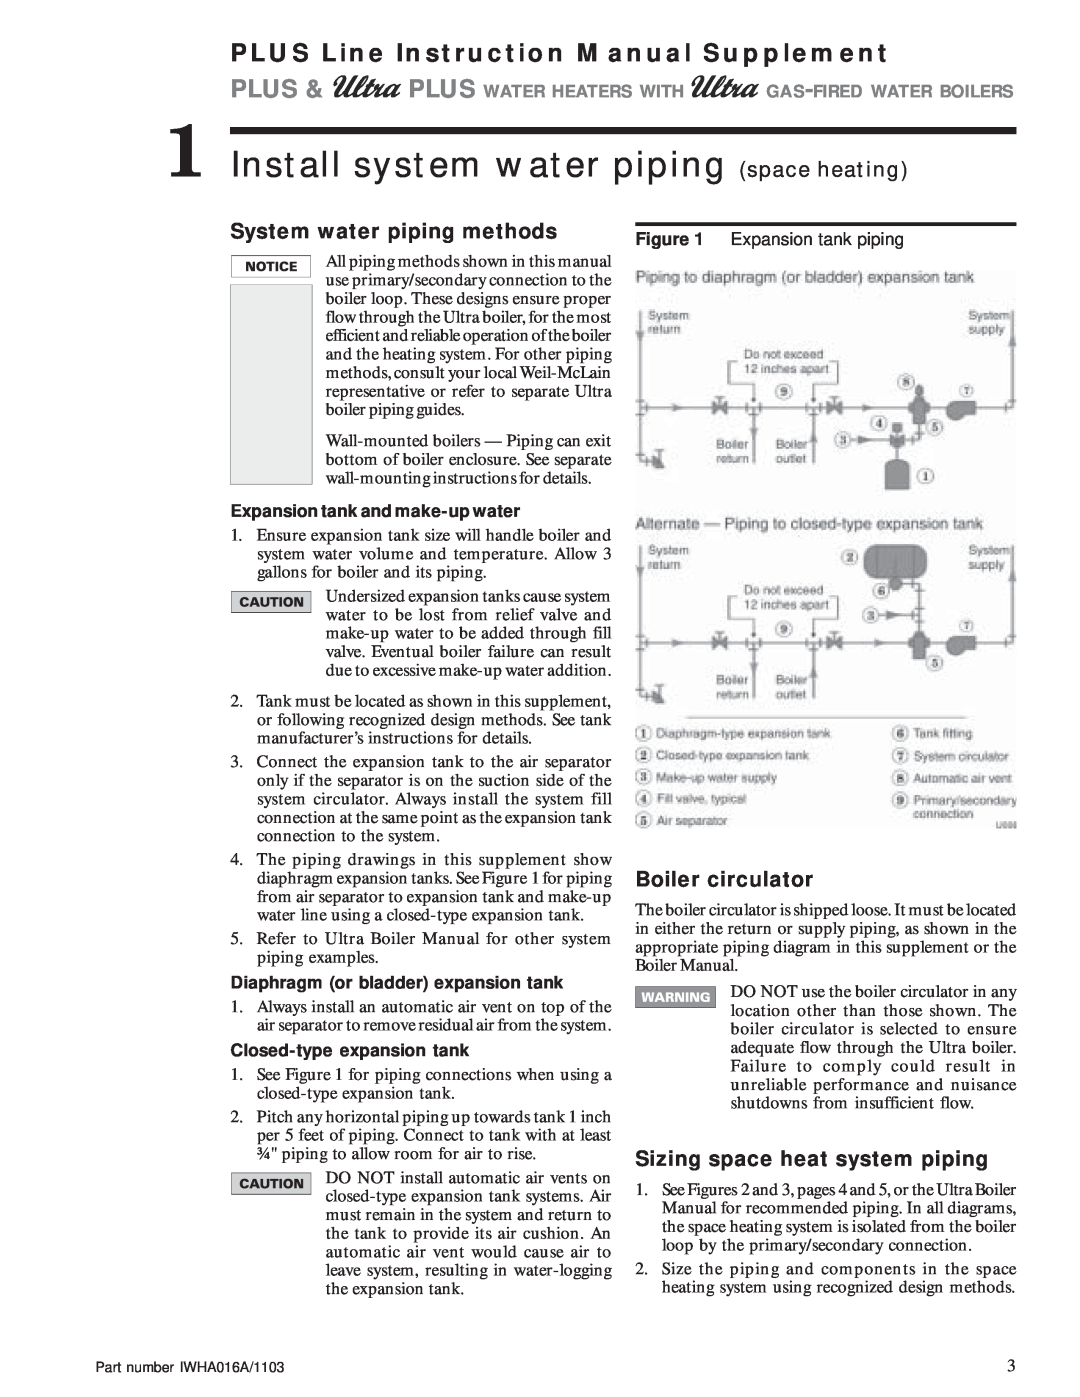 Weil-McLain Electric Water Heater instruction manual Install system water piping space heating, System water piping methods 